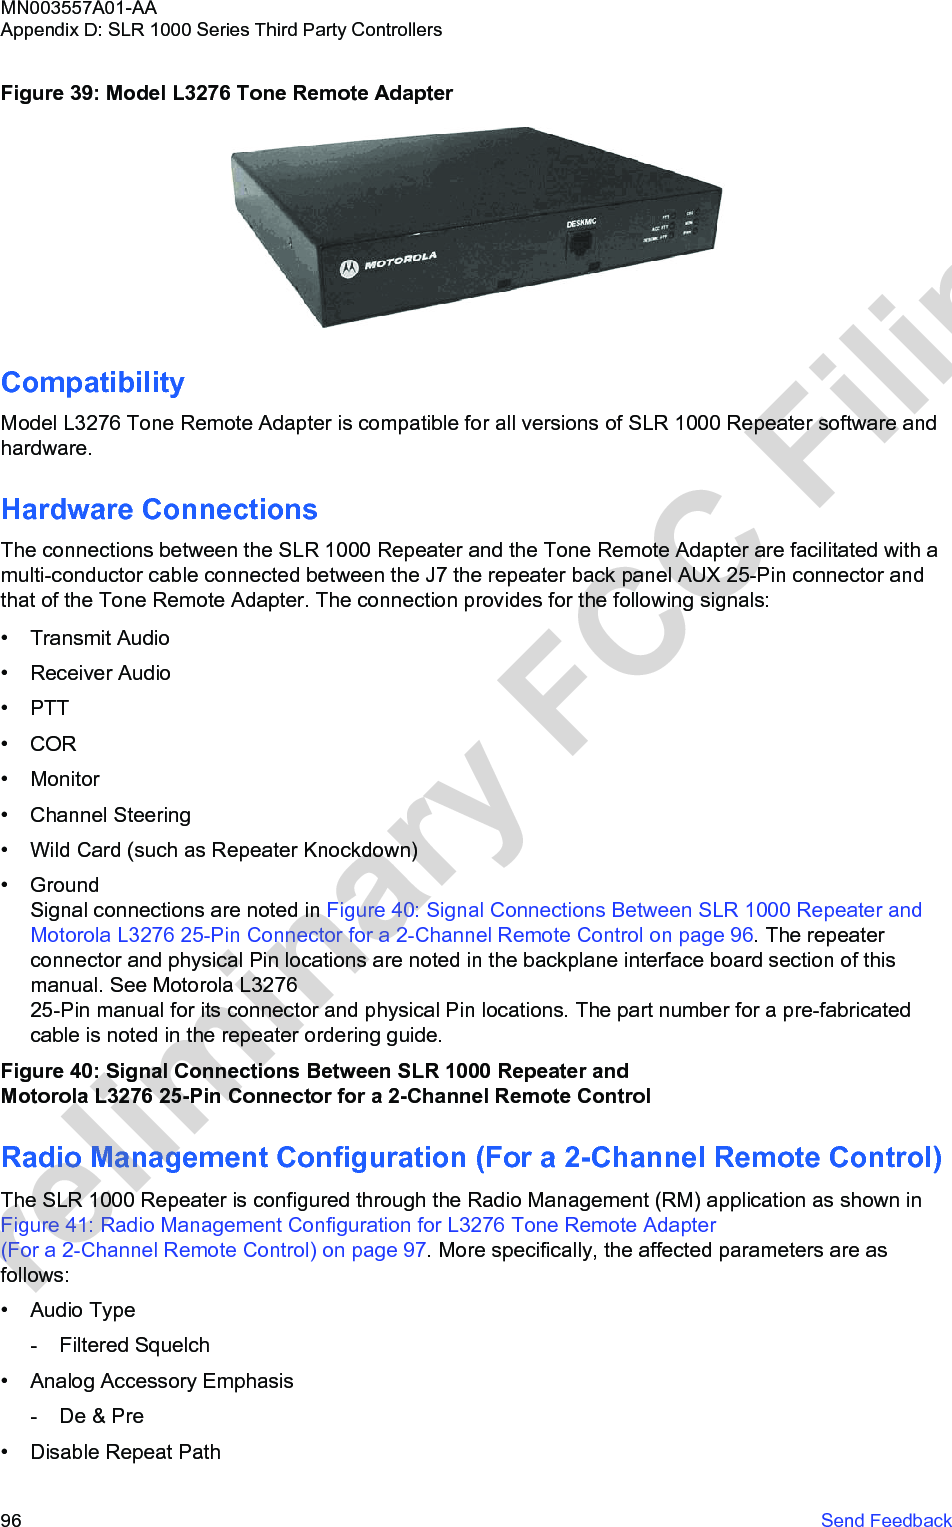 Figure 39: Model L3276 Tone Remote AdapterCompatibilityModel L3276 Tone Remote Adapter is compatible for all versions of SLR 1000 Repeater software andhardware.Hardware ConnectionsThe connections between the SLR 1000 Repeater and the Tone Remote Adapter are facilitated with amulti-conductor cable connected between the J7 the repeater back panel AUX 25-Pin connector andthat of the Tone Remote Adapter. The connection provides for the following signals:• Transmit Audio• Receiver Audio• PTT• COR• Monitor• Channel Steering• Wild Card (such as Repeater Knockdown)• GroundSignal connections are noted in Figure 40: Signal Connections Between SLR 1000 Repeater and Motorola L3276 25-Pin Connector for a 2-Channel Remote Control on page 96. The repeaterconnector and physical Pin locations are noted in the backplane interface board section of thismanual. See Motorola L3276 25-Pin manual for its connector and physical Pin locations. The part number for a pre-fabricatedcable is noted in the repeater ordering guide.Figure 40: Signal Connections Between SLR 1000 Repeater and Motorola L3276 25-Pin Connector for a 2-Channel Remote ControlRadio Management Configuration (For a 2-Channel Remote Control)The SLR 1000 Repeater is configured through the Radio Management (RM) application as shown in Figure 41: Radio Management Configuration for L3276 Tone Remote Adapter (For a 2-Channel Remote Control) on page 97. More specifically, the affected parameters are asfollows:• Audio Type- Filtered Squelch• Analog Accessory Emphasis- De &amp; Pre• Disable Repeat PathMN003557A01-AAAppendix D: SLR 1000 Series Third Party Controllers96   Send FeedbackPreliminary FCC Filing